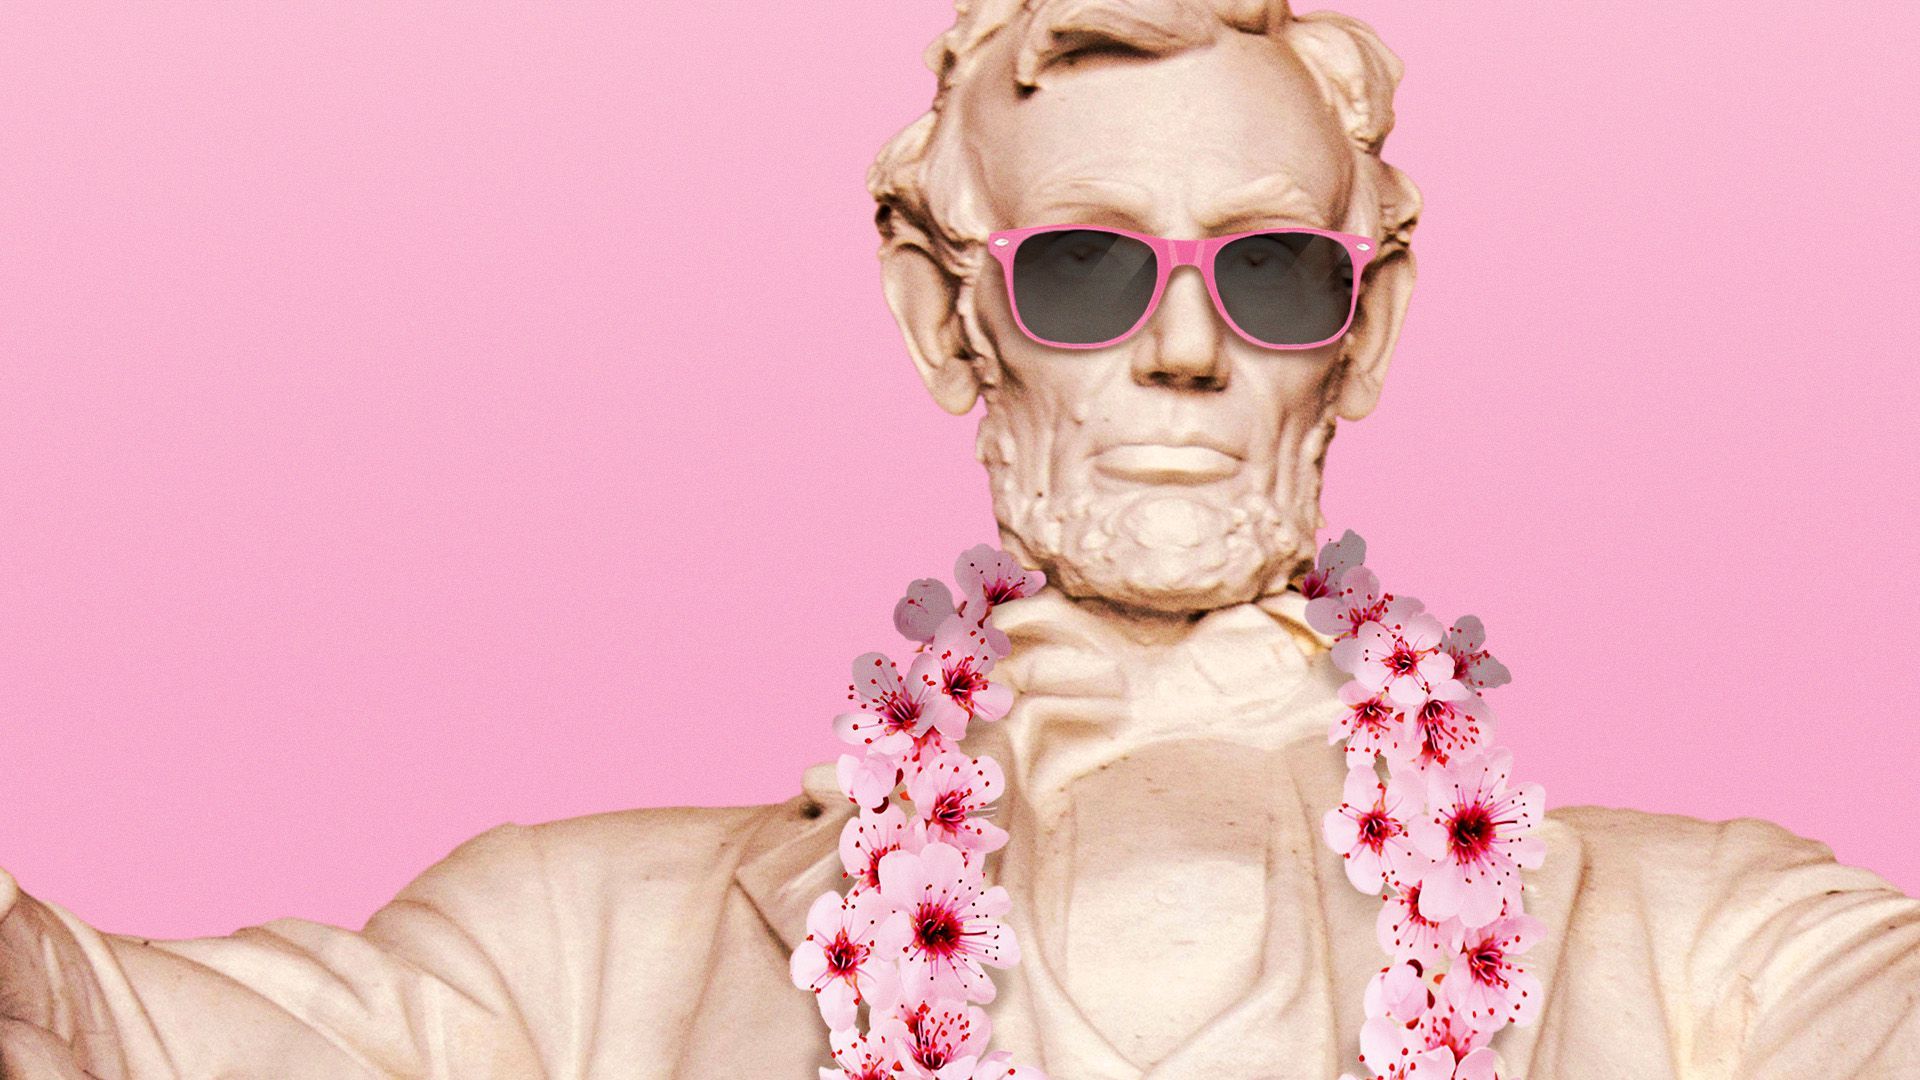 Illustration of the Lincoln Memorial wearing pink sunglasses and a lei made of cherry blossom flowers.